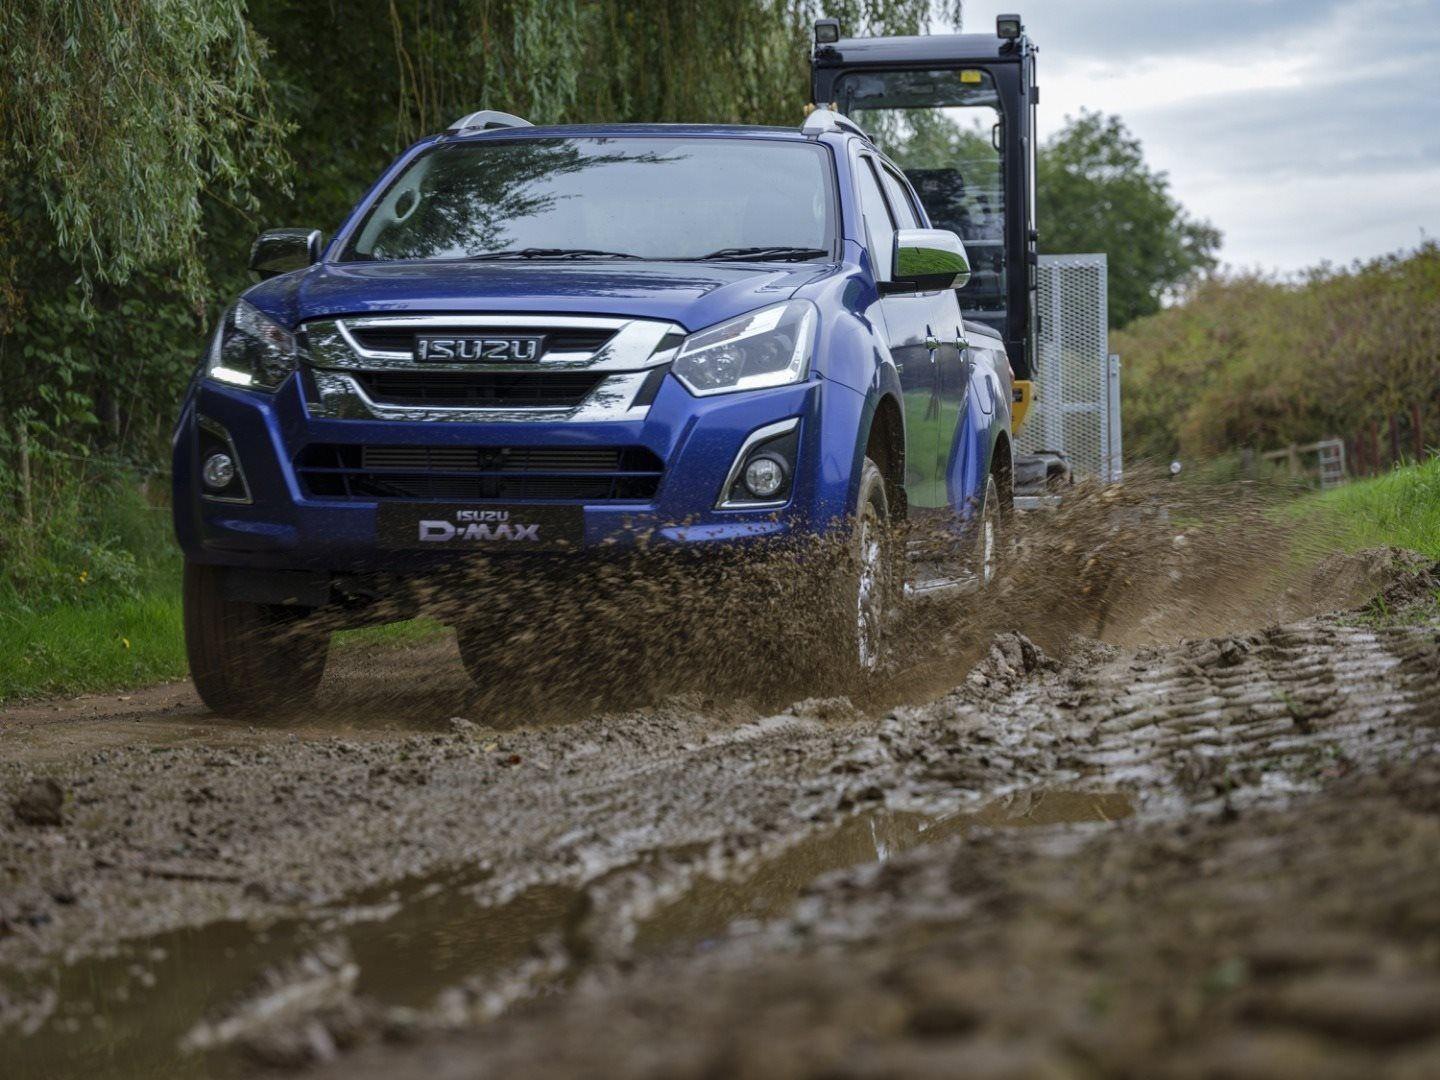 ISUZU D-MAX WINS PICK UP OF THE YEAR AT THE COMMERCIAL FLEET AWARDS 2018